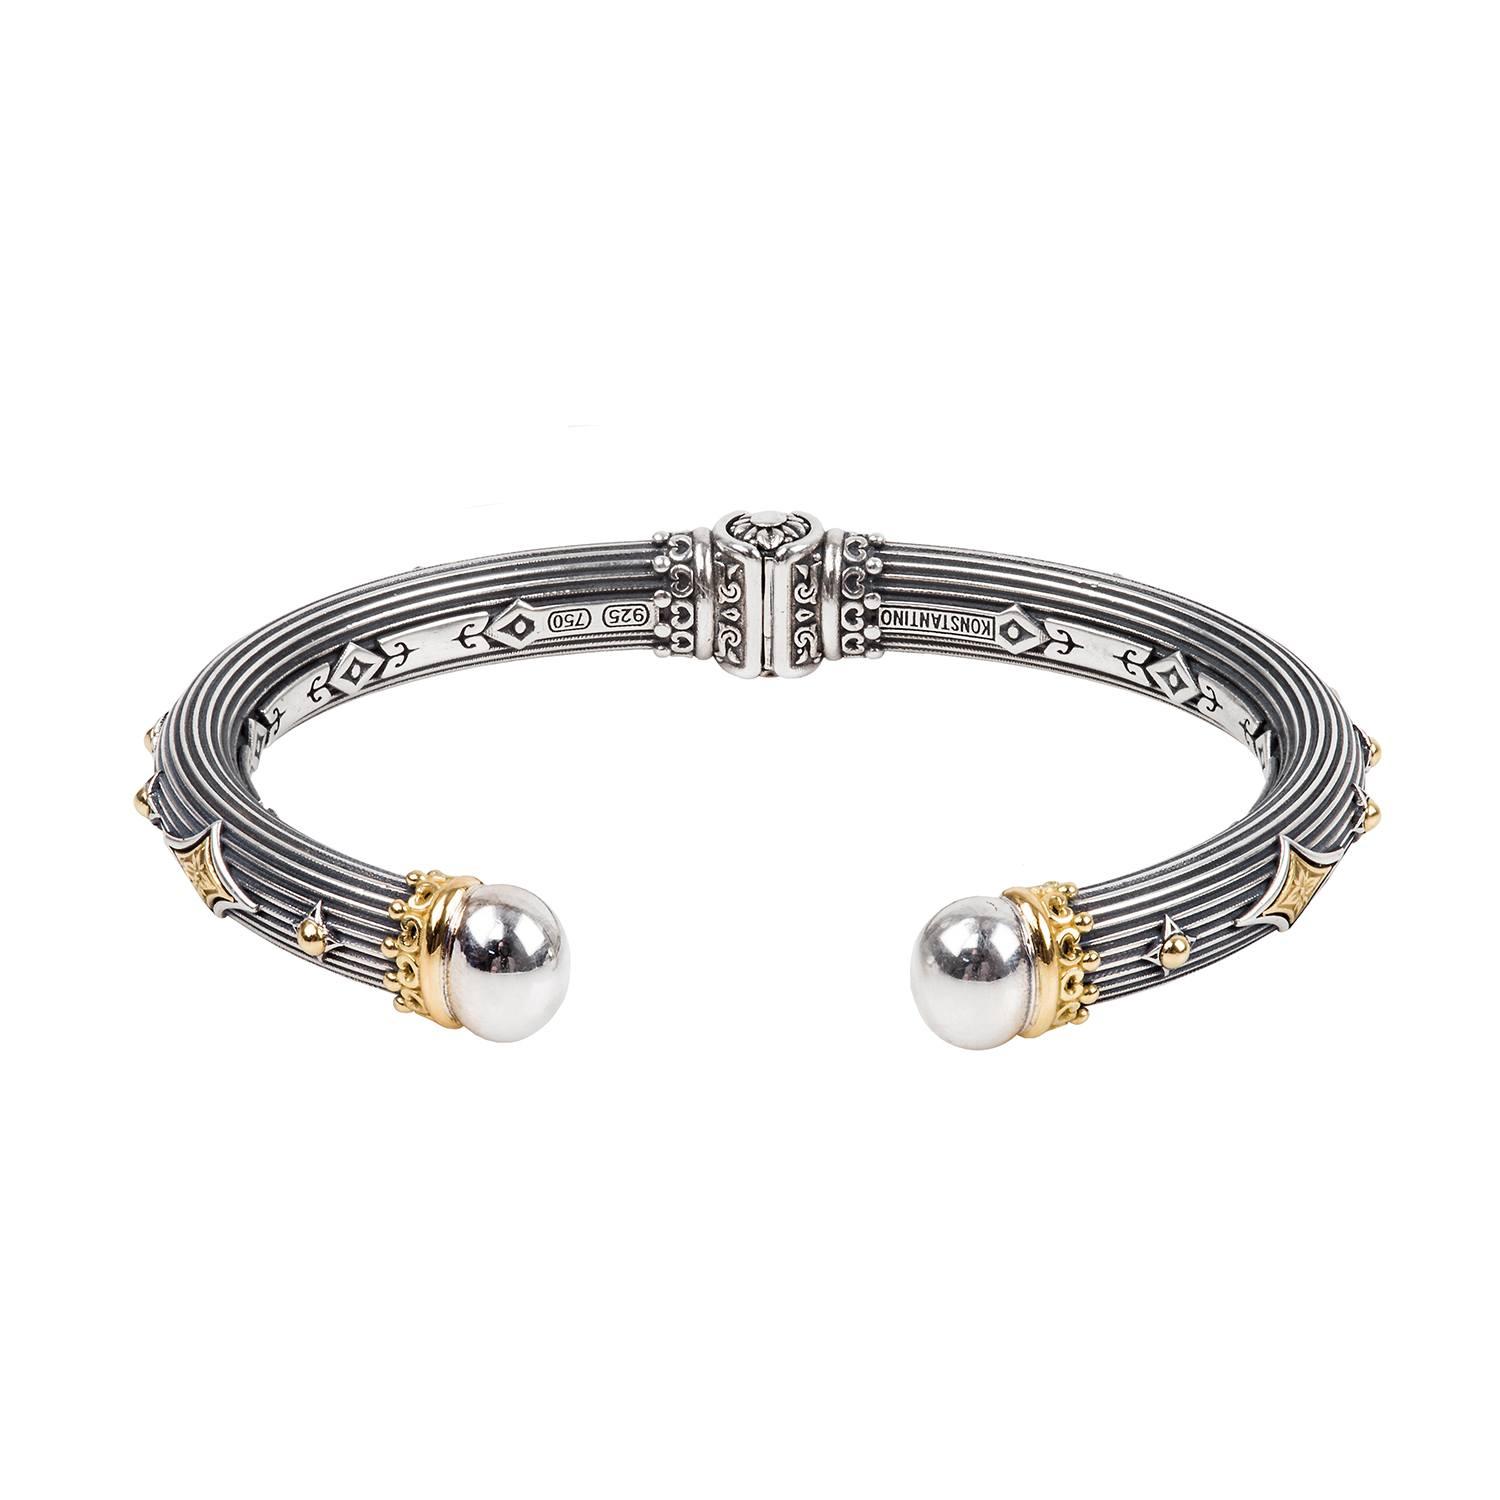 Konstantino Delos grooved open hinge bracelet with 18kt gold diamond accents_1